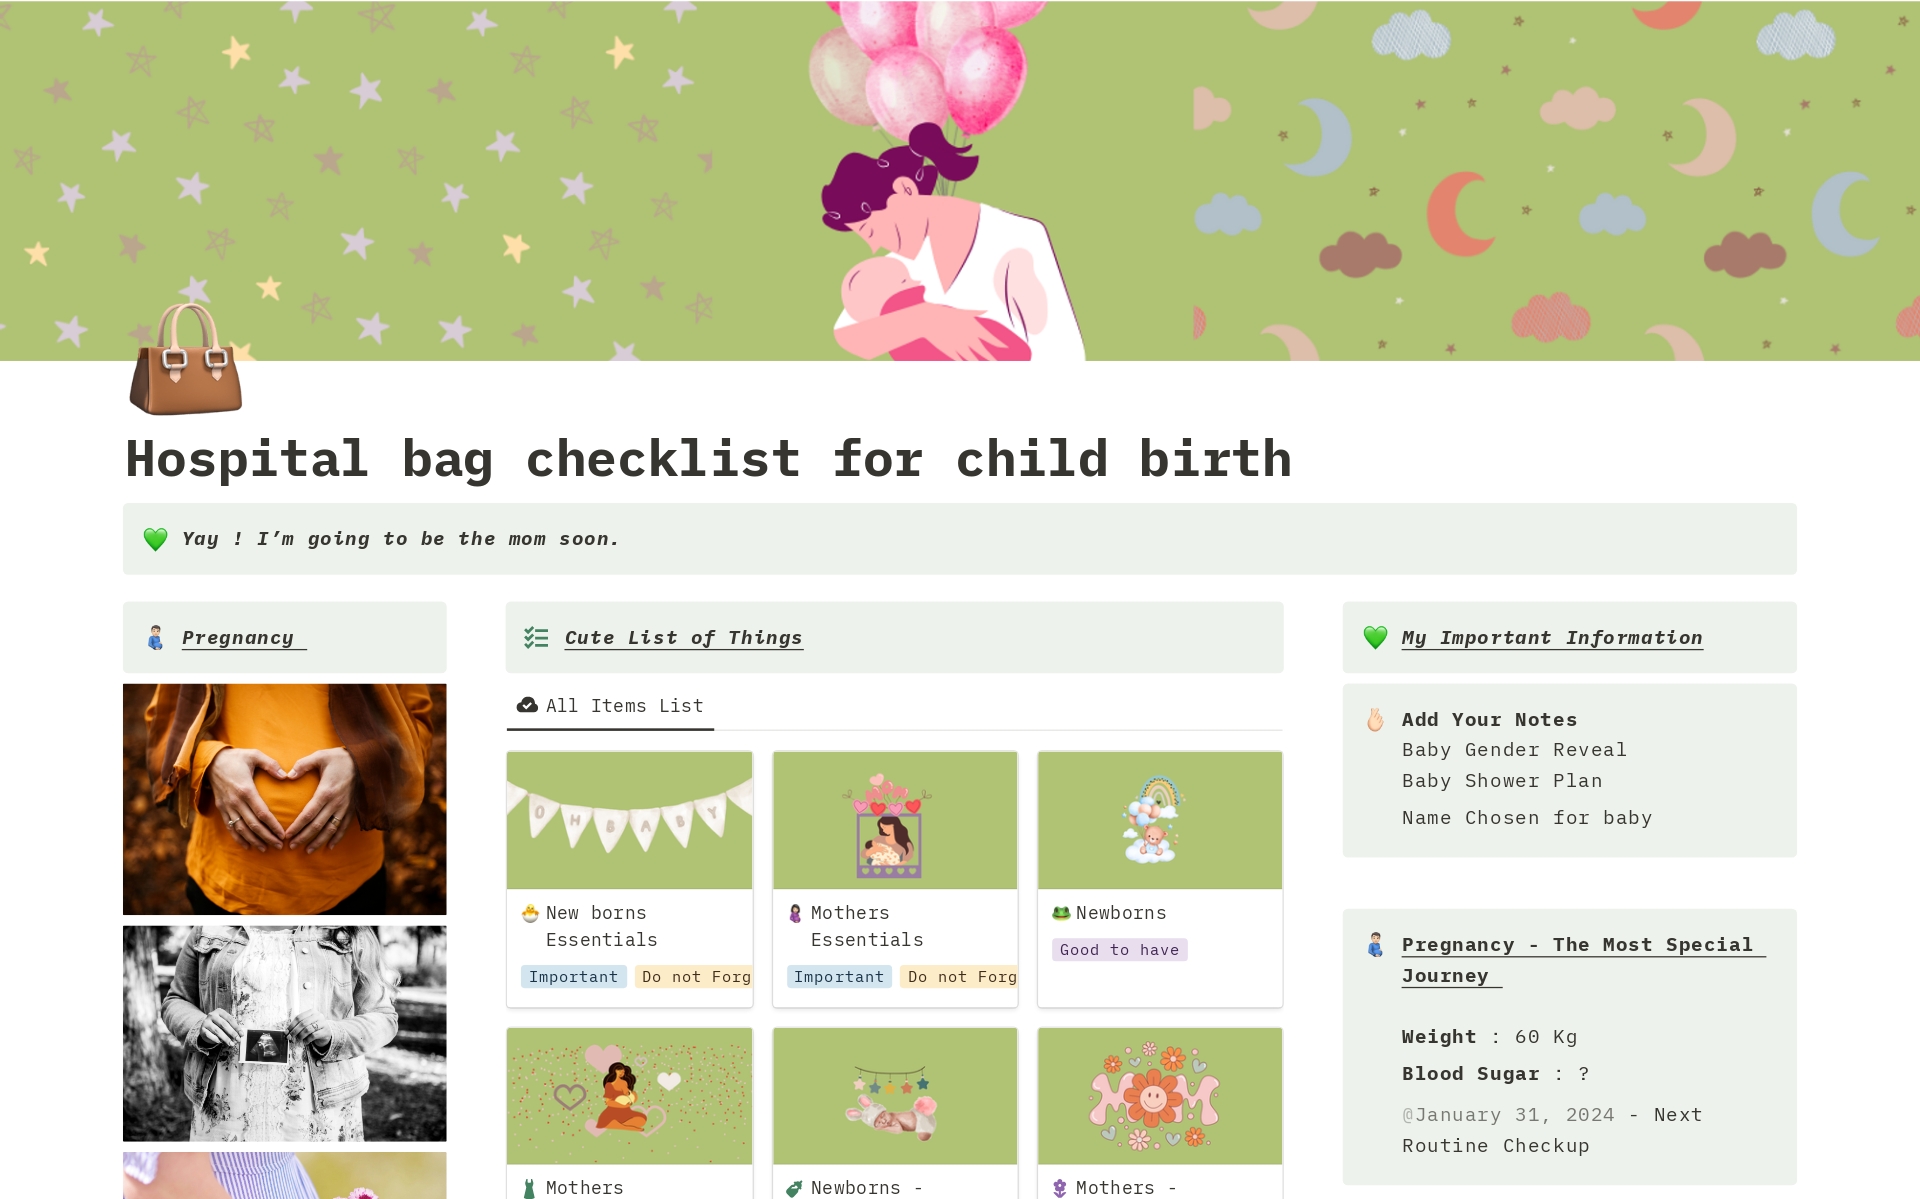 An Aesthetic Ultimate Hospital Bag checklist for Childbirth is designed to make you love this checklist rather than panic about hospital visits. 